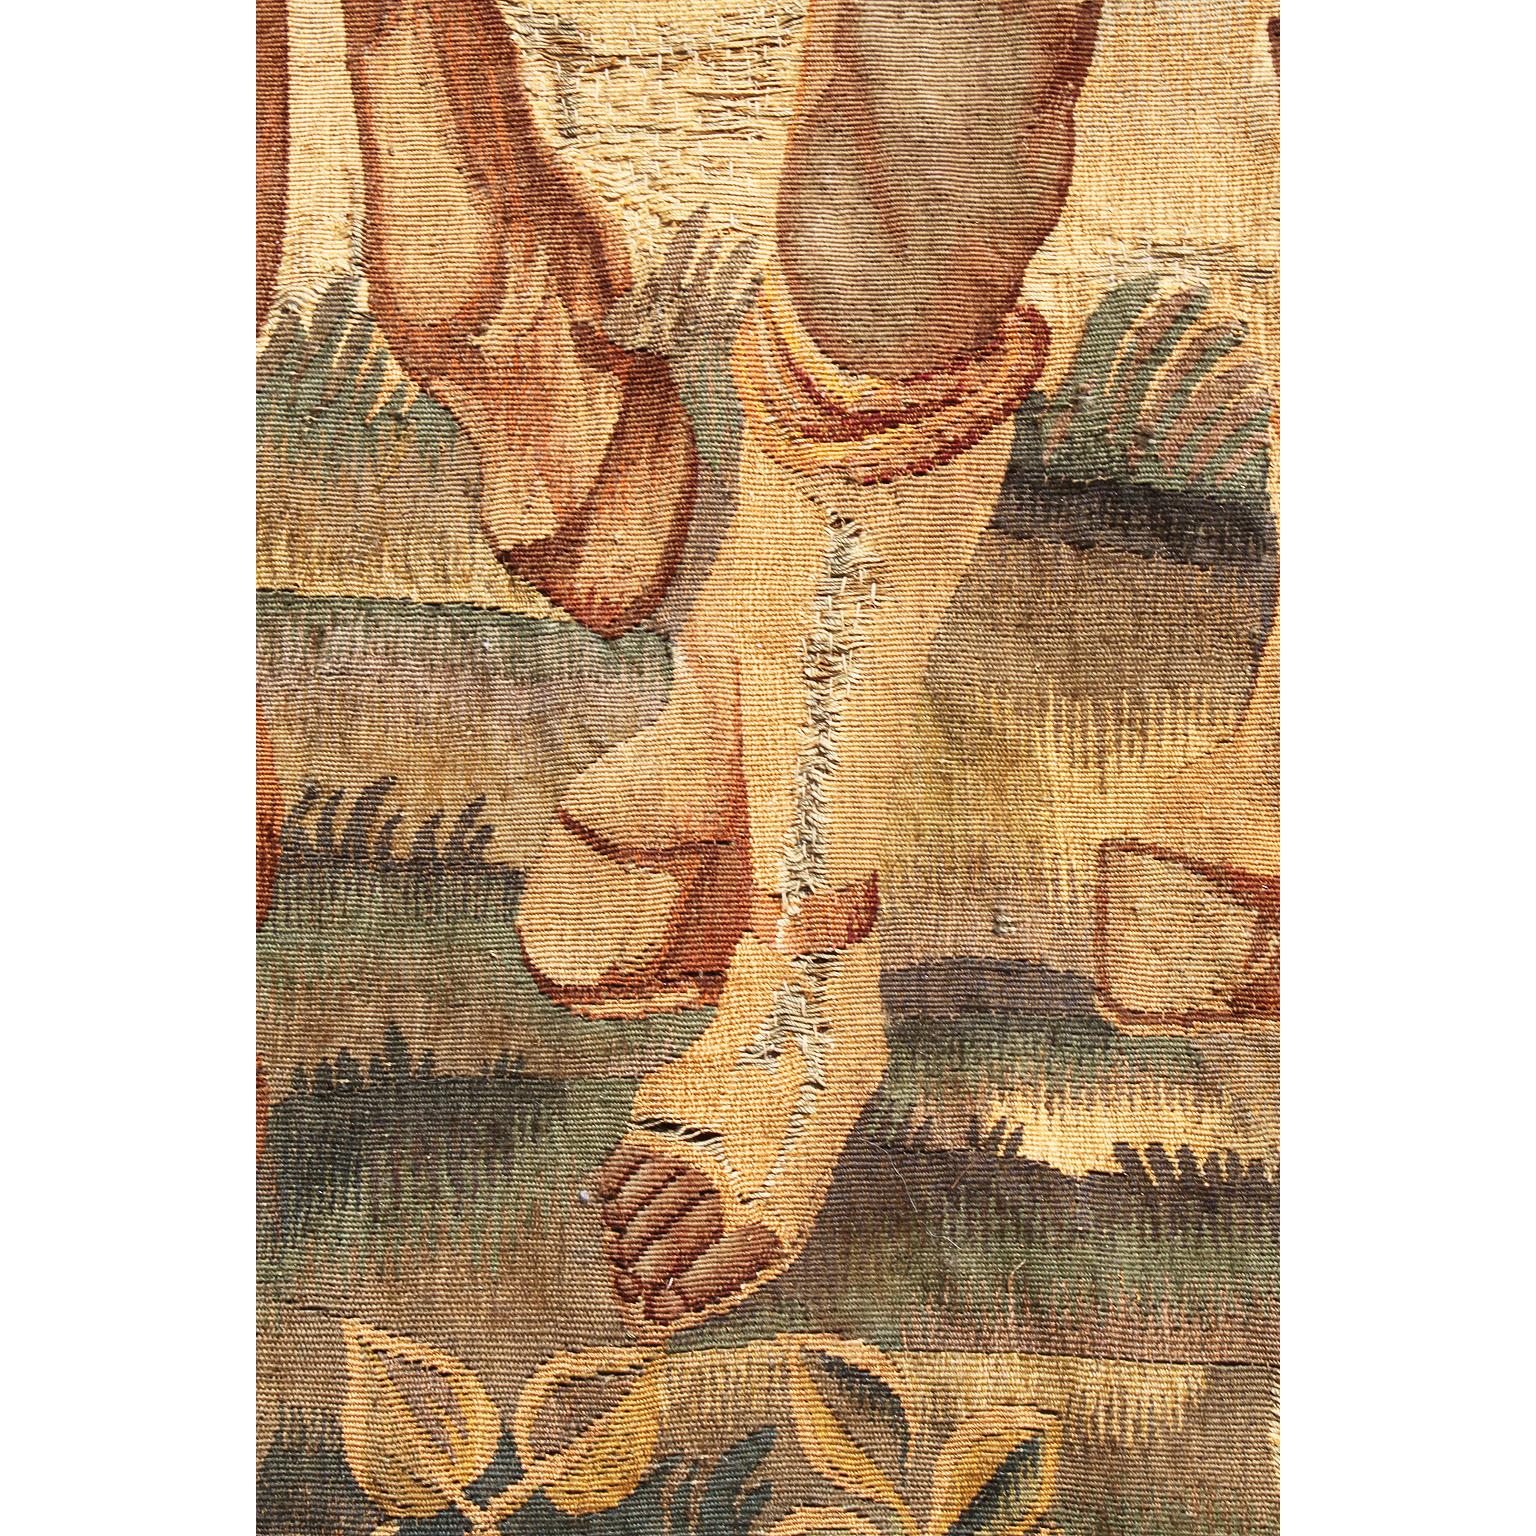 Flemish 17th-18th Century Baroque Historical Tapestry Fragment 